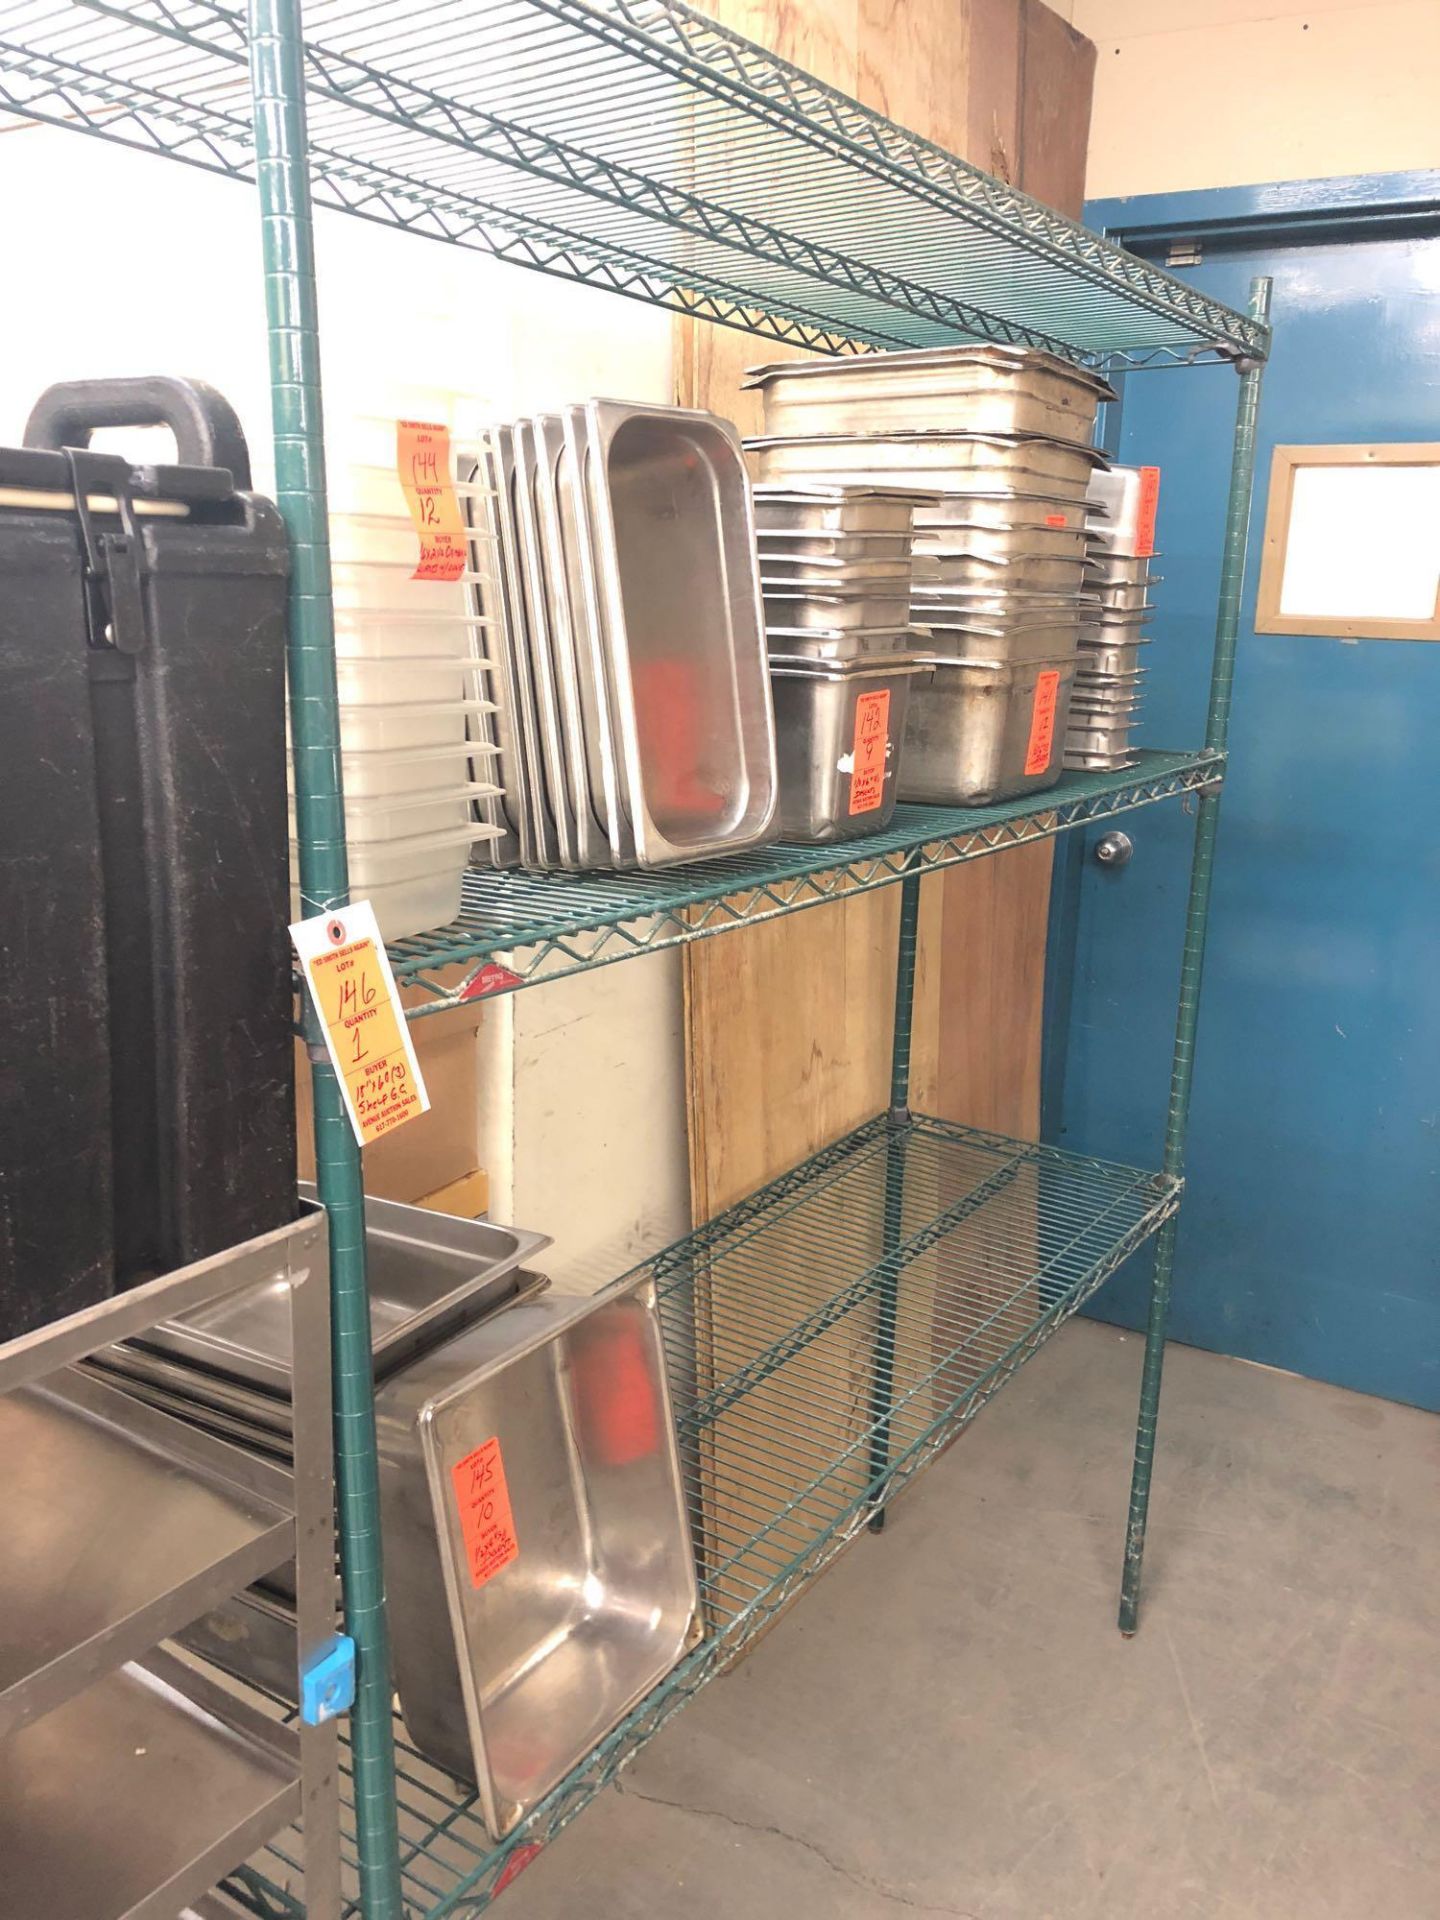 18” x 60” green epoxy coated shelving unit with three shelves